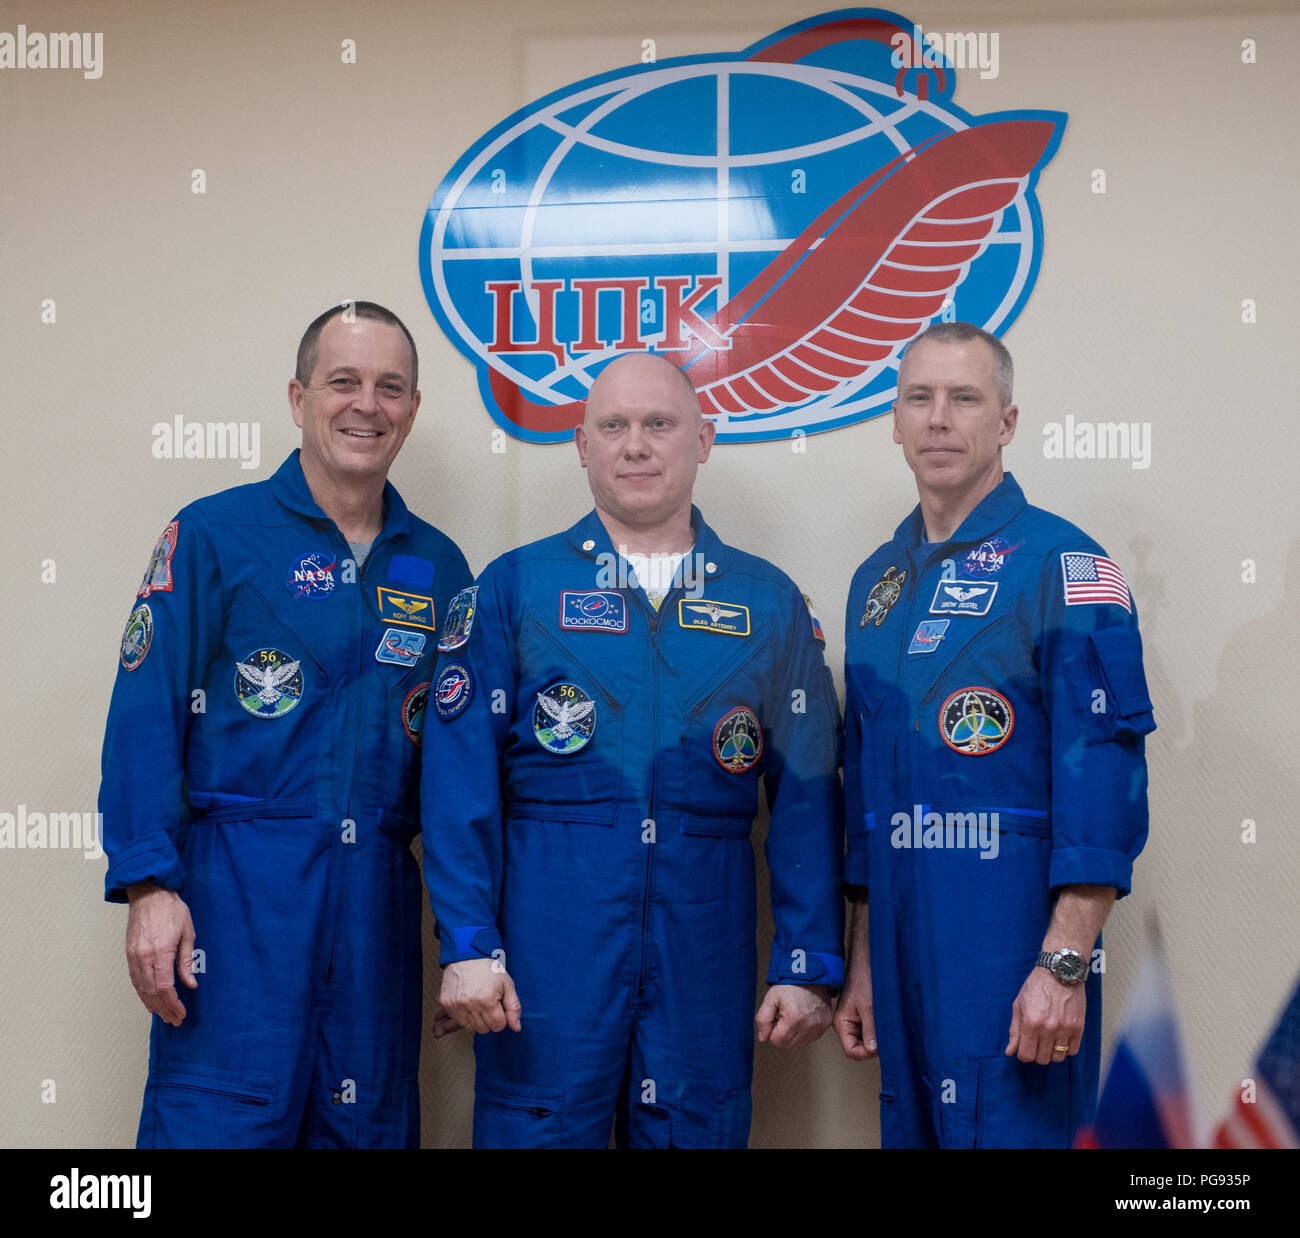 Expedition 55 flight engineer Ricky Arnold of NASA, left, Soyuz Commander Oleg Artemyev of Roscosmos, center, and flight engineer Drew Feustel of NASA, right, pose for a picture at the conclusion of a press conference, Tuesday, March 20, 2018 at the Cosmonaut Hotel in Baikonur, Kazakhstan. Arnold, Artemyev, and Feustel are scheduled to launch to the International Space Station aboard the Soyuz MS-08 spacecraft on Wednesday, March, 21. Stock Photo